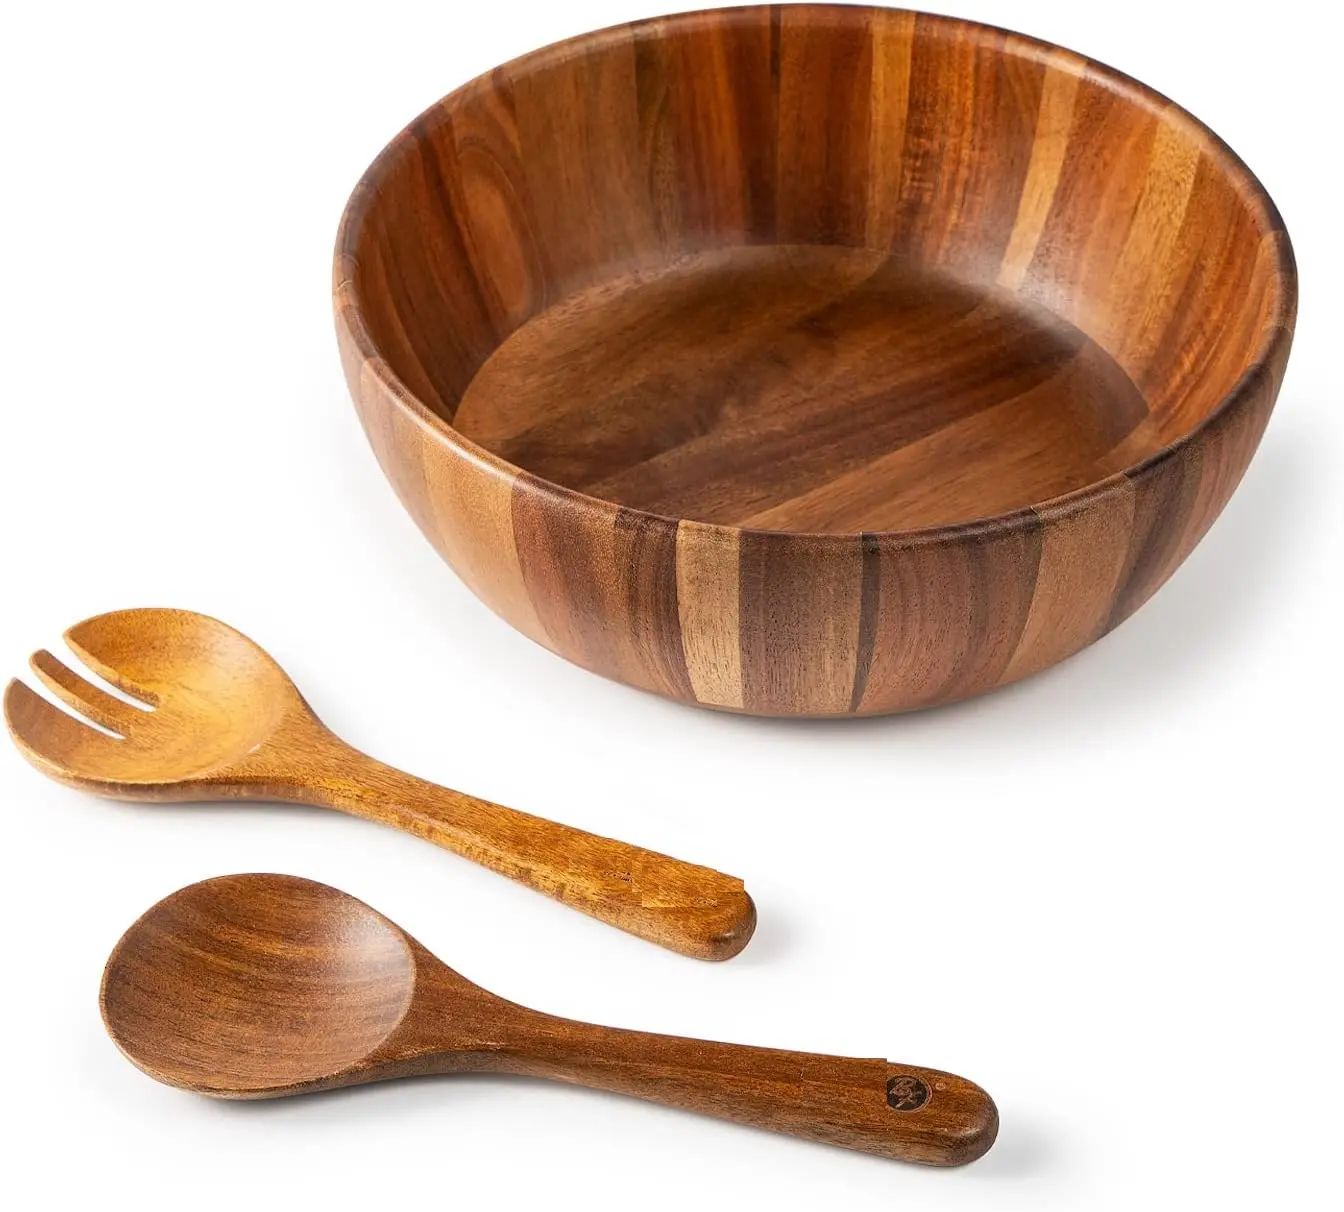 Combohome Wholesale High Quality Acacia Wood Salad Wooden Bowl Antique Natural Bamboo Salad Bowl for Vegetables